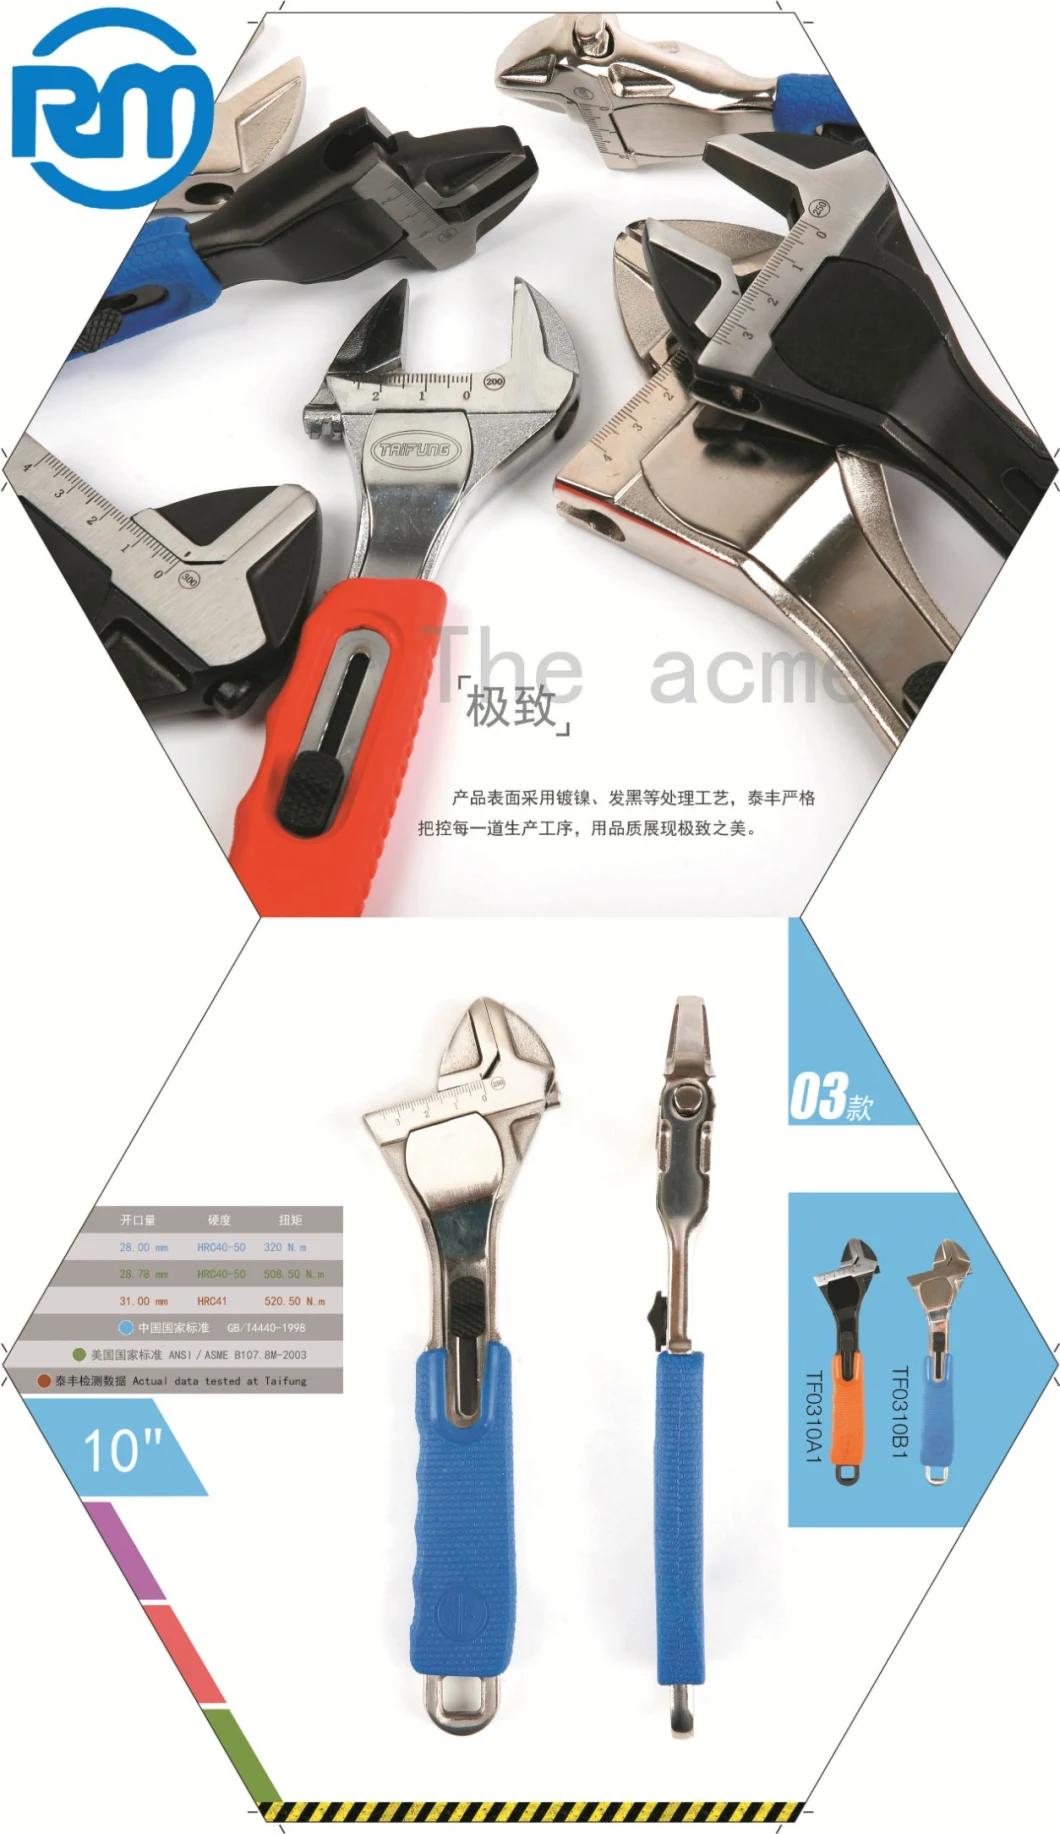 Easily Push and Pull Cheap Carbon Steel Adjustable Wrench Nickel Plating Surface Professional Quality Sliding Button